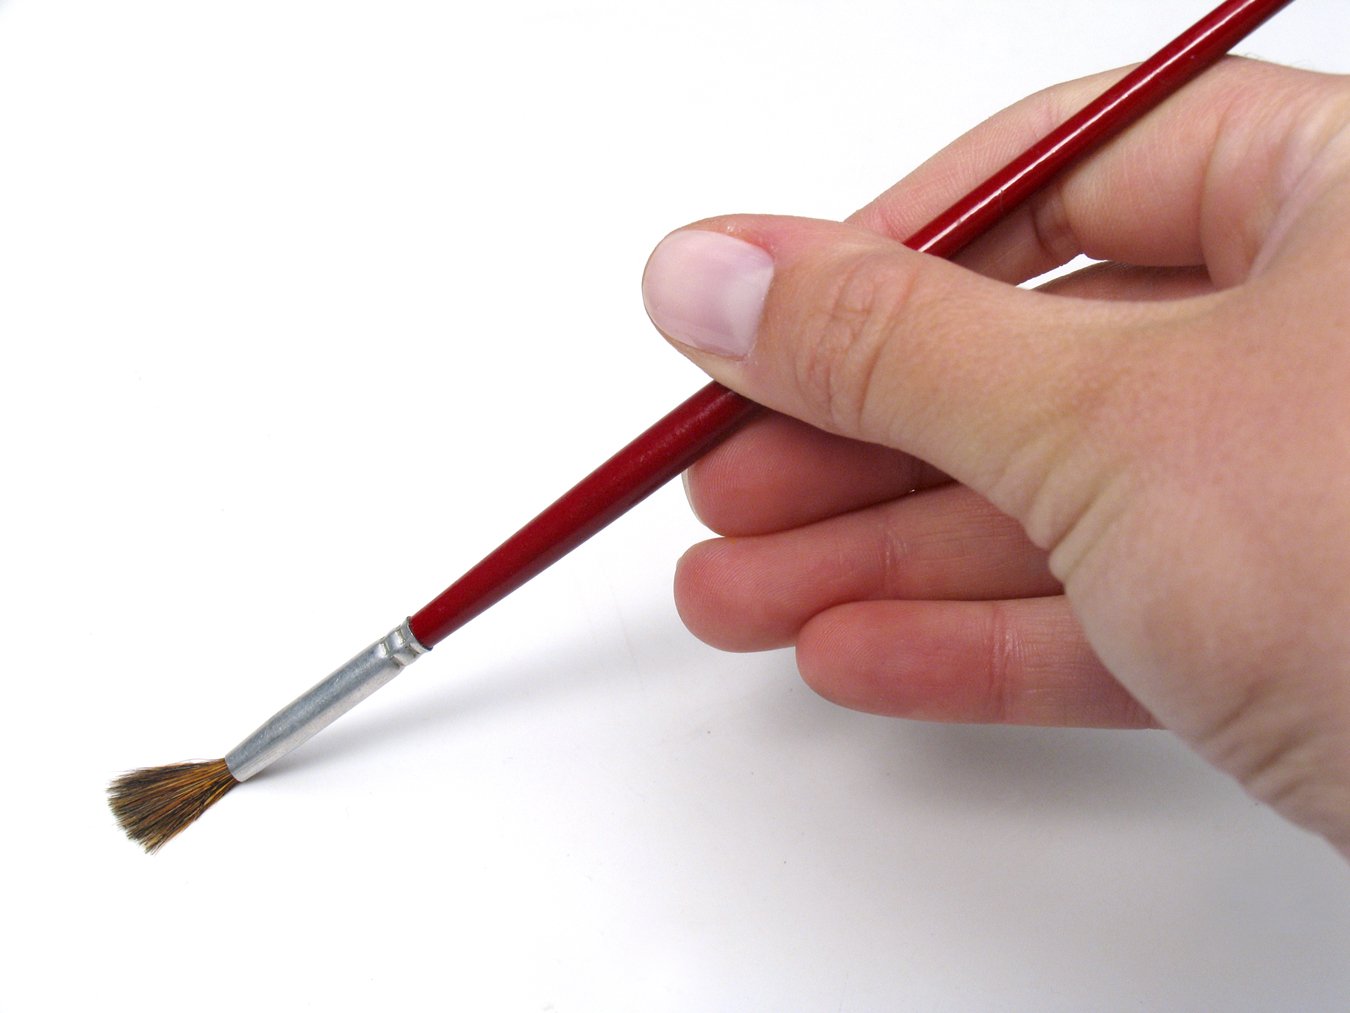 a person is holding a small red paintbrush